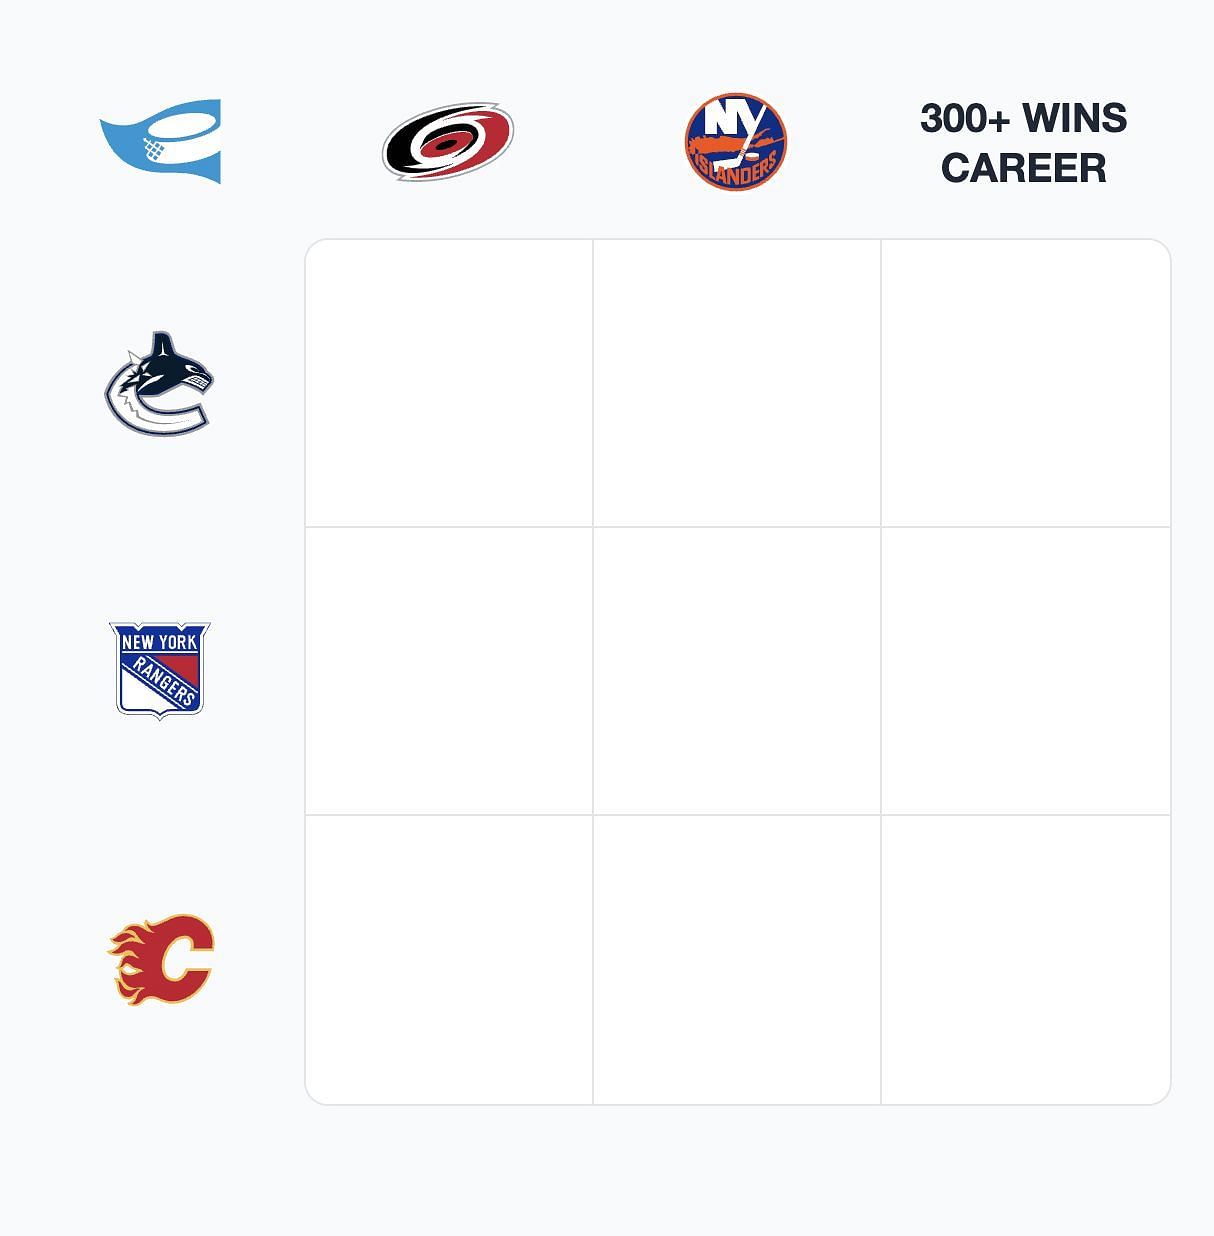 NHL Immaculate Grid answers for August 29